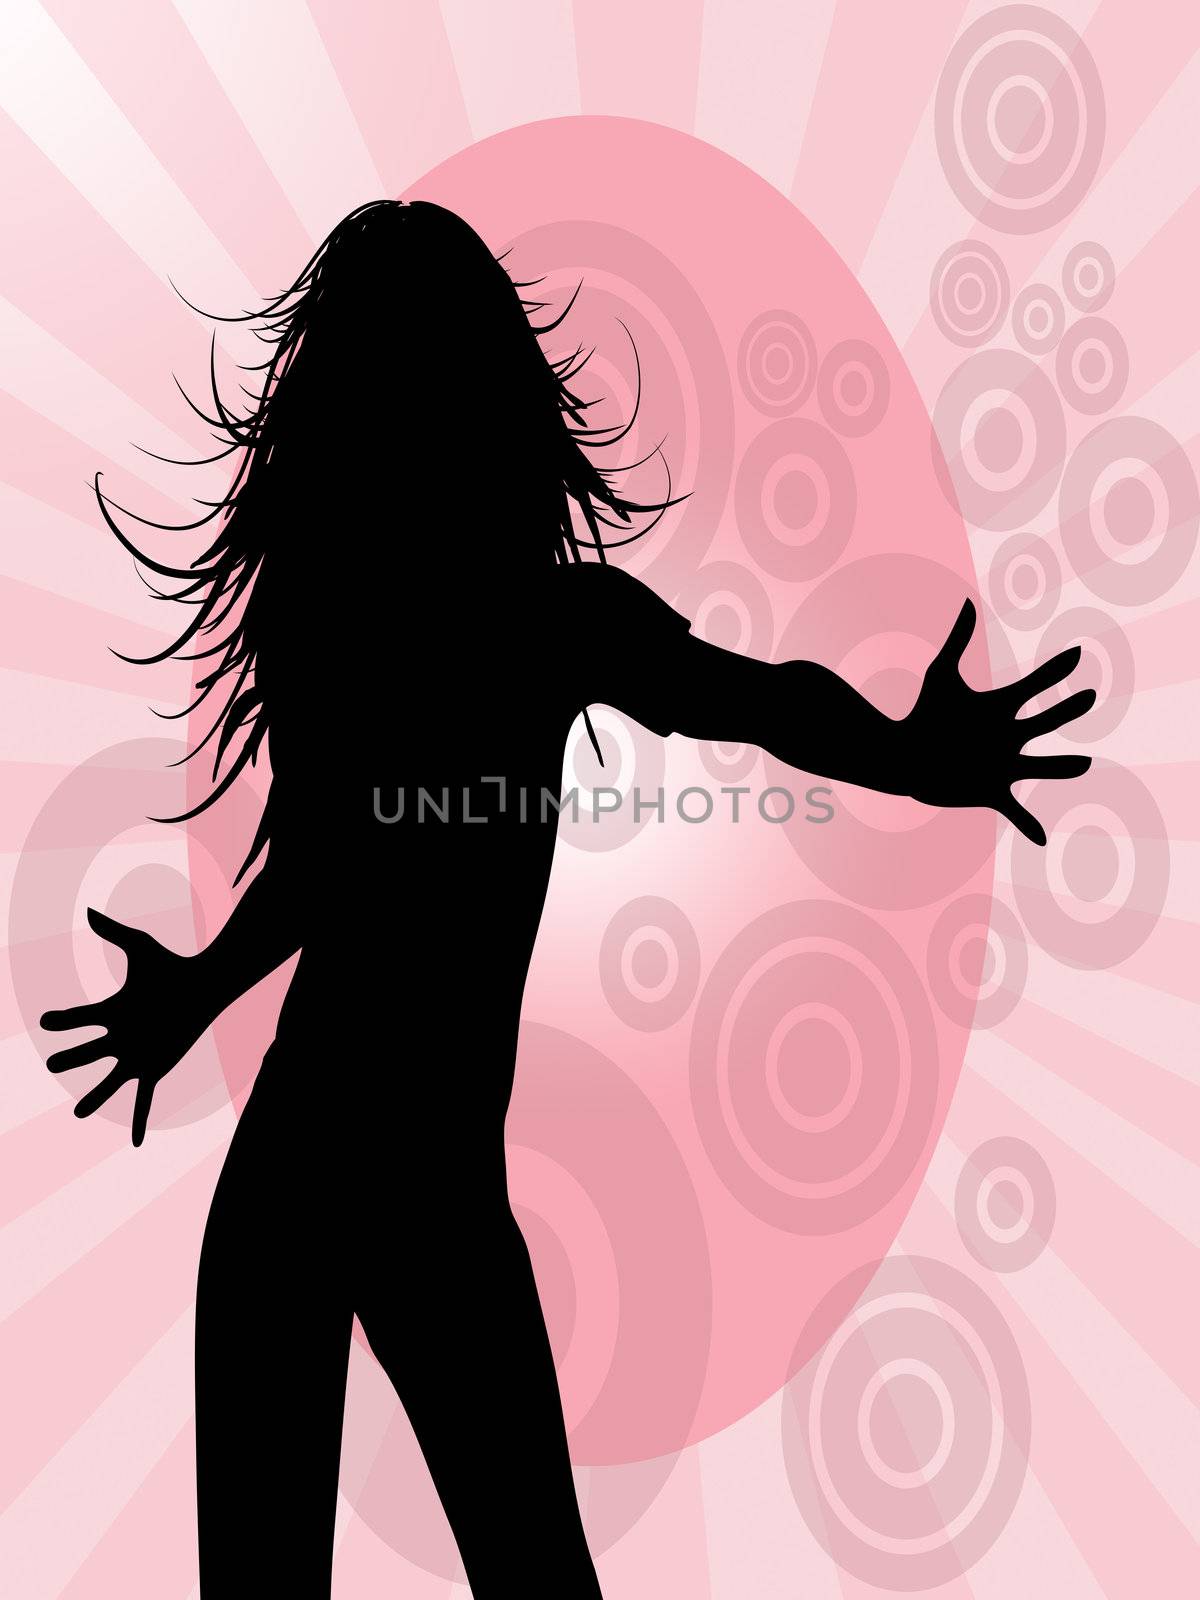 silhouette of dancing woman on background with frame 